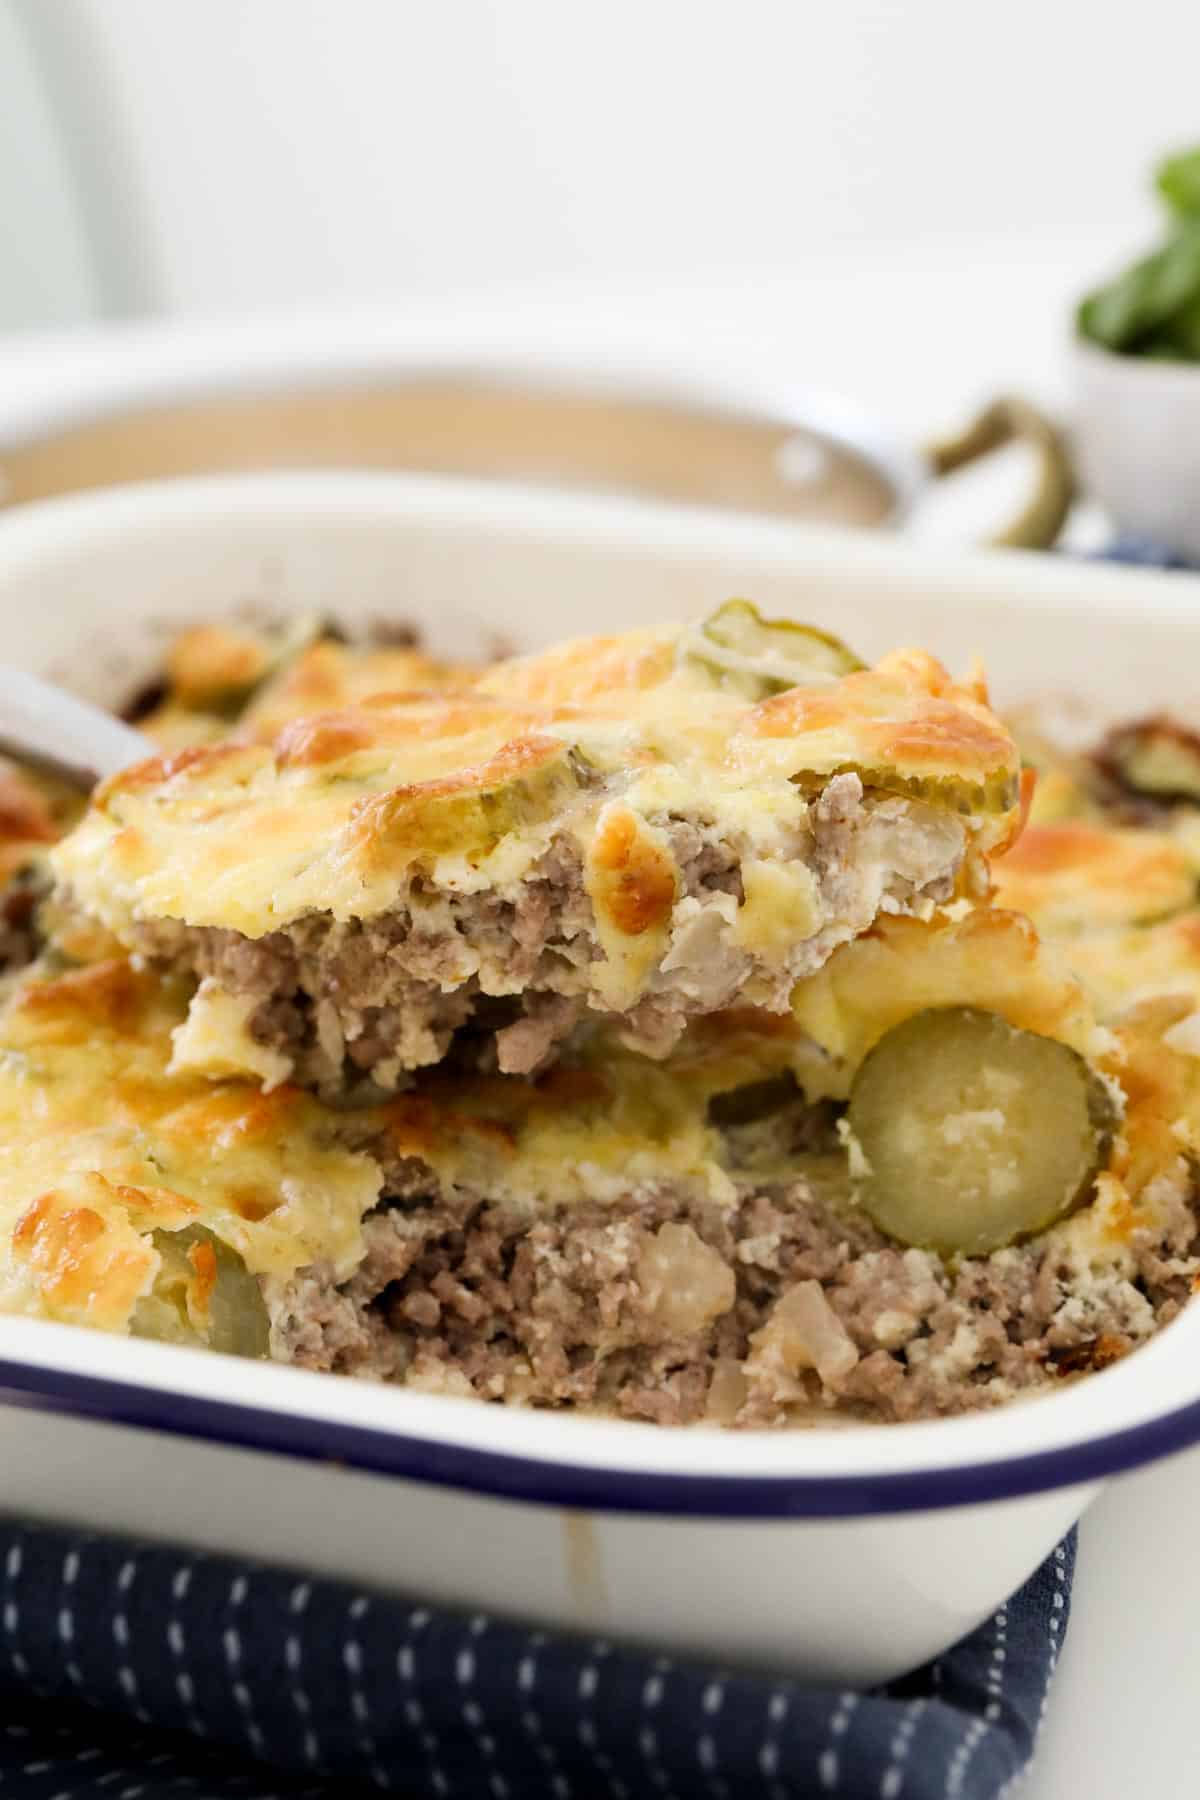 A spoon lifting a cheesy beef bake out of a dish.